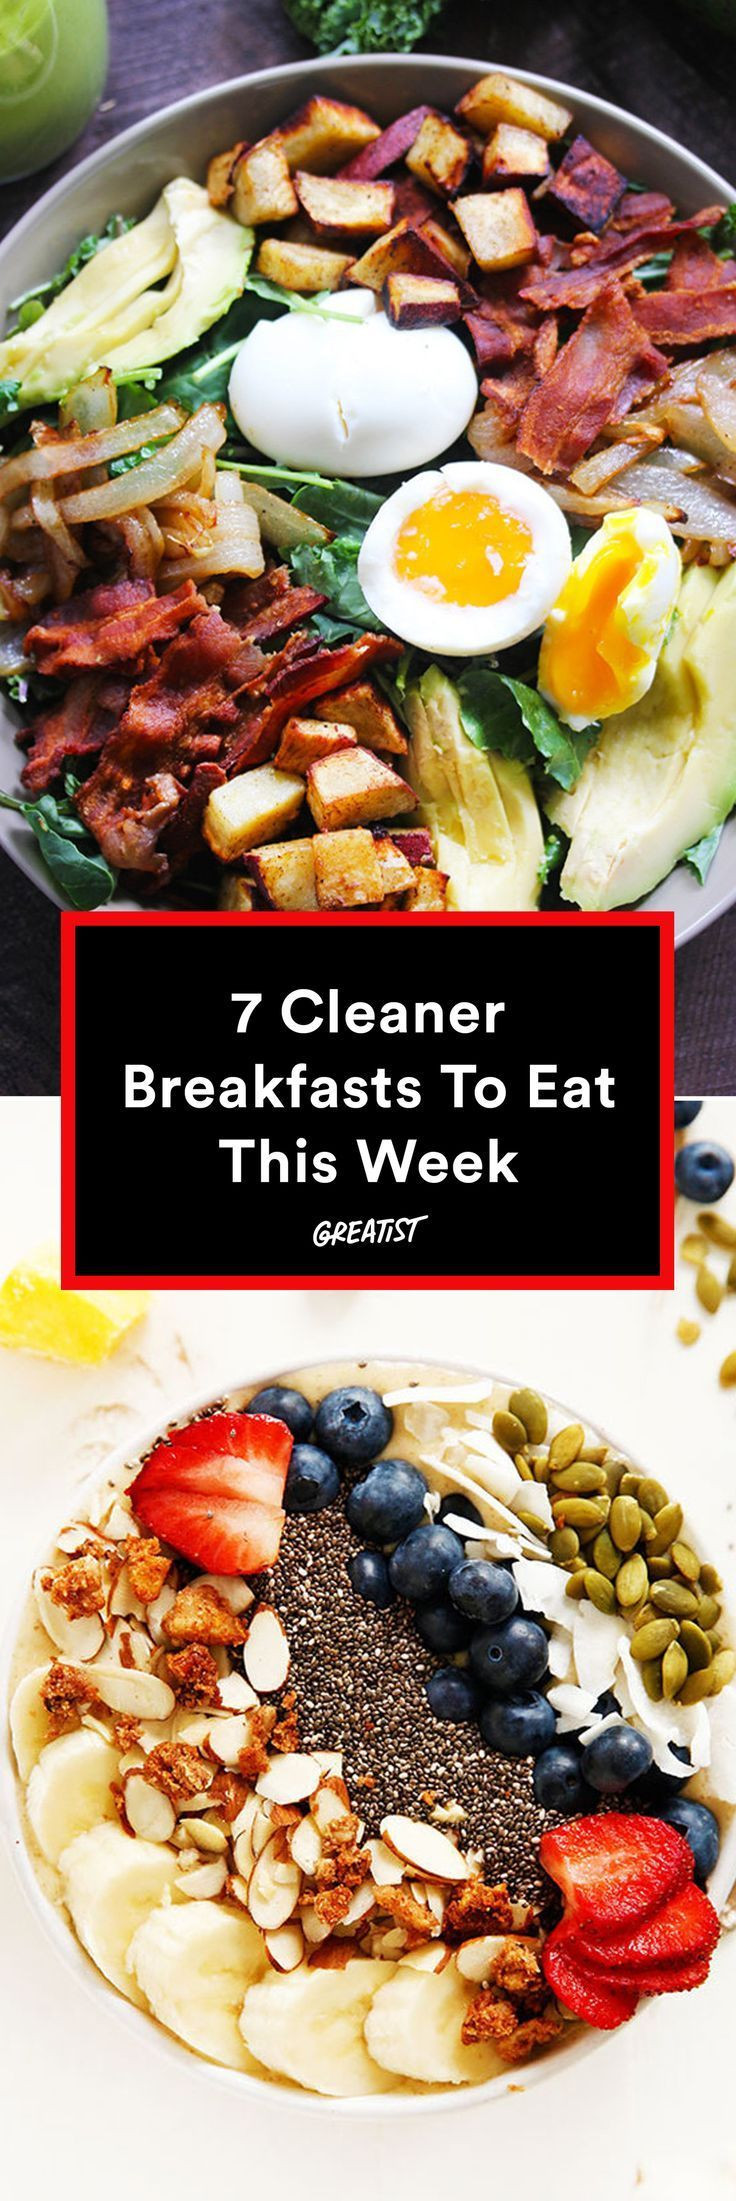 Clean Eating Breakfast Options
 7 Clean Breakfasts to Brighten Your Morning